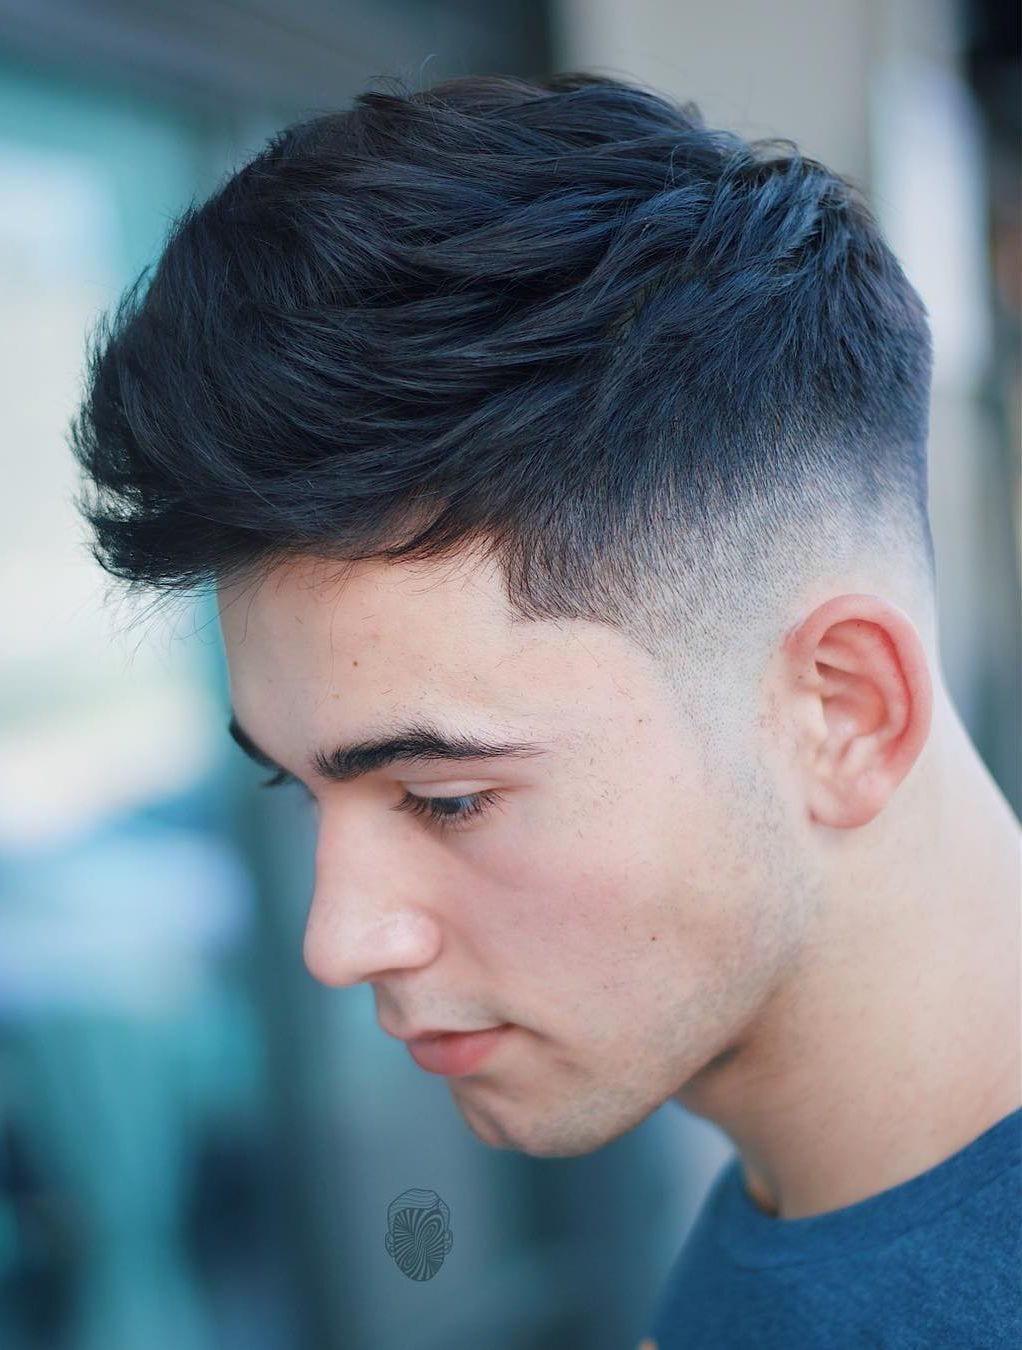 Boy Haircuts For Thick Hair
 50 Best Hairstyles for Teenage Boys The Ultimate Guide 2019